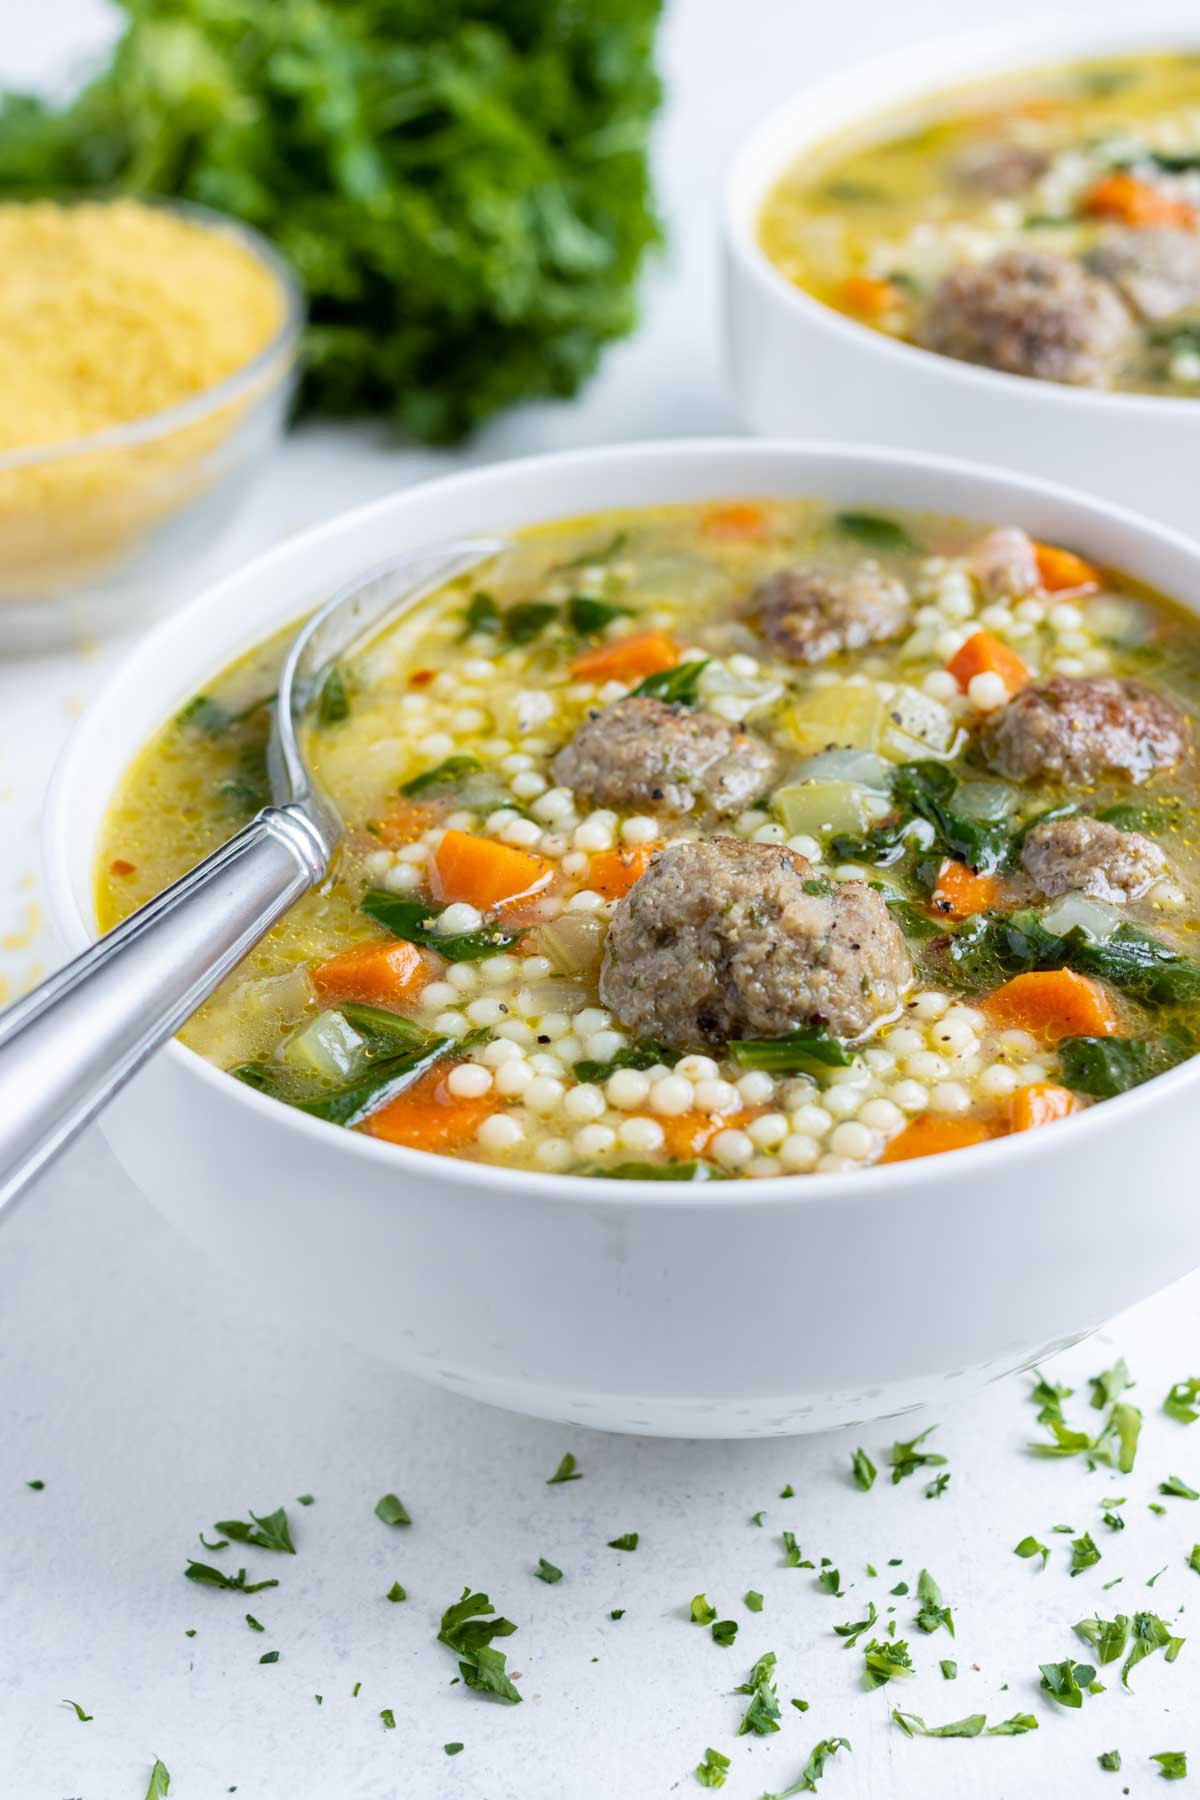 Italian wedding soup is served in a white bowl.